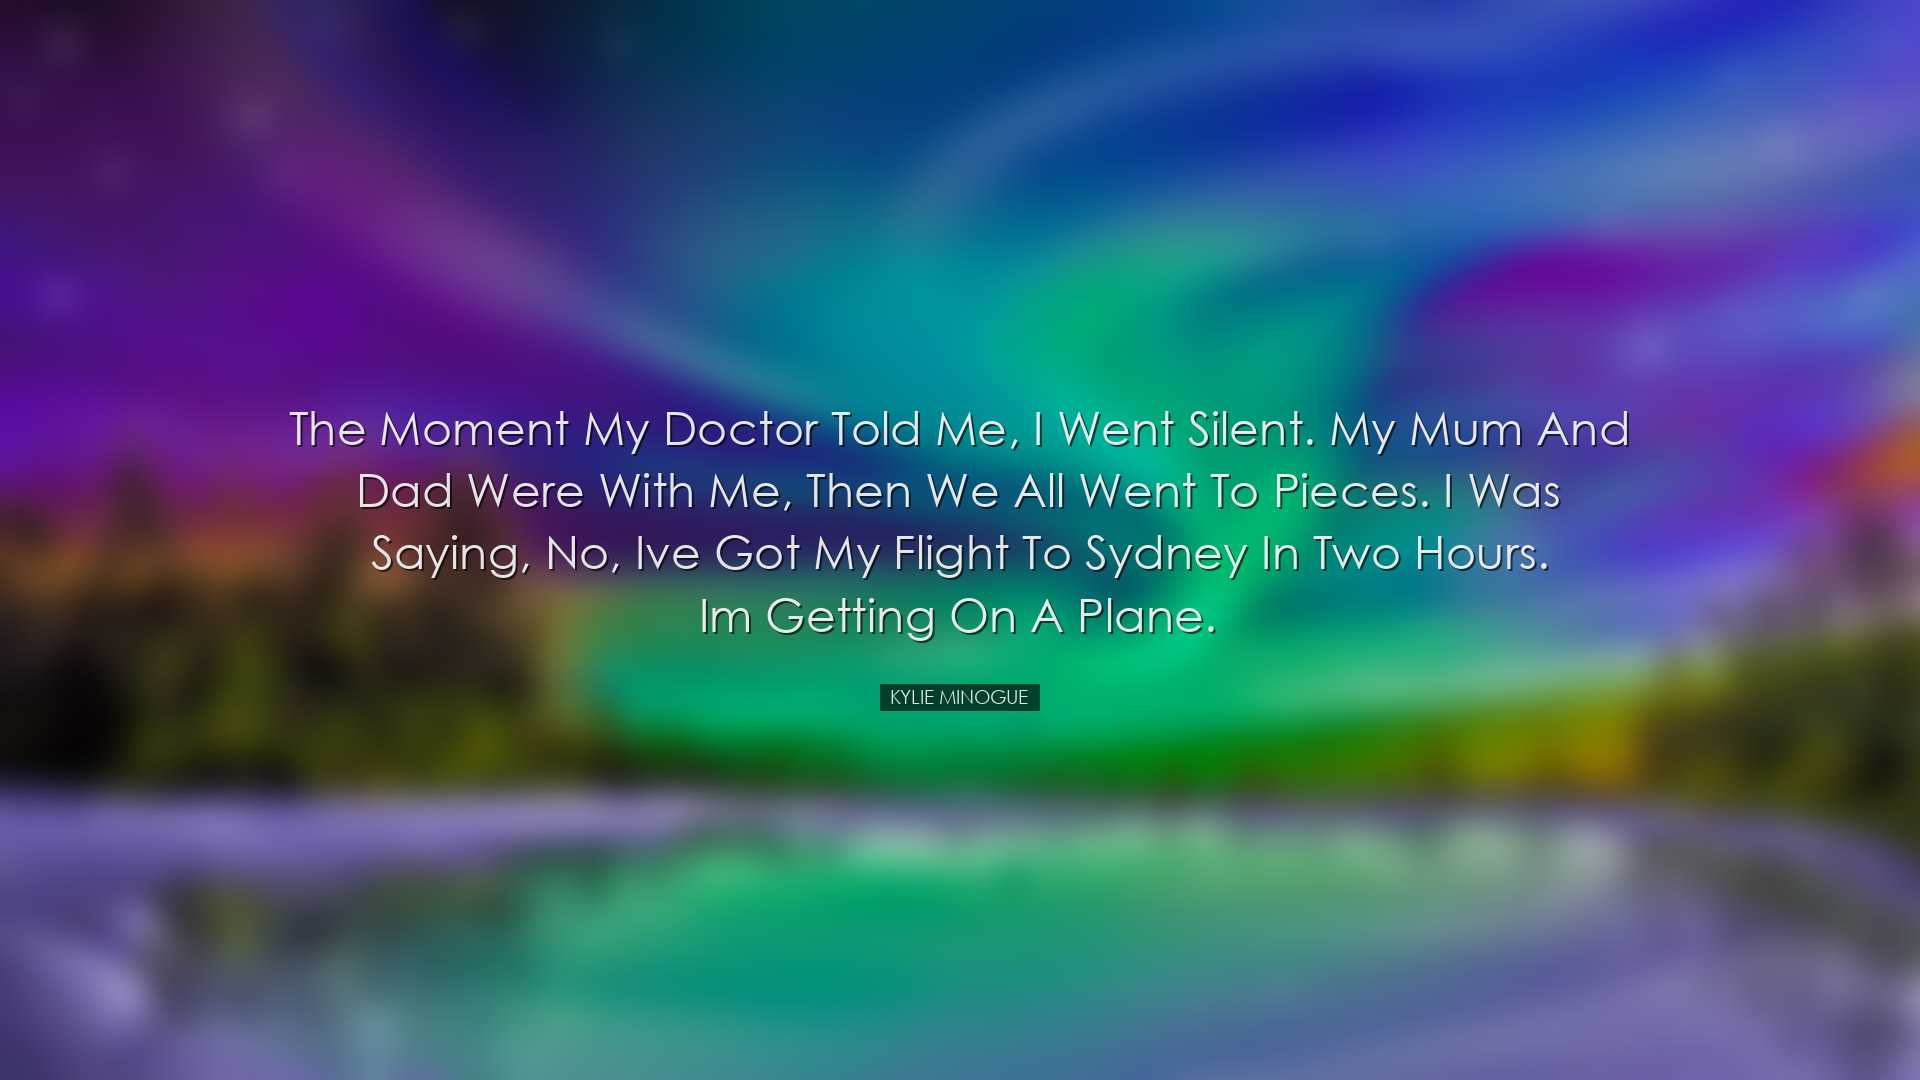 The moment my doctor told me, I went silent. My mum and dad were w